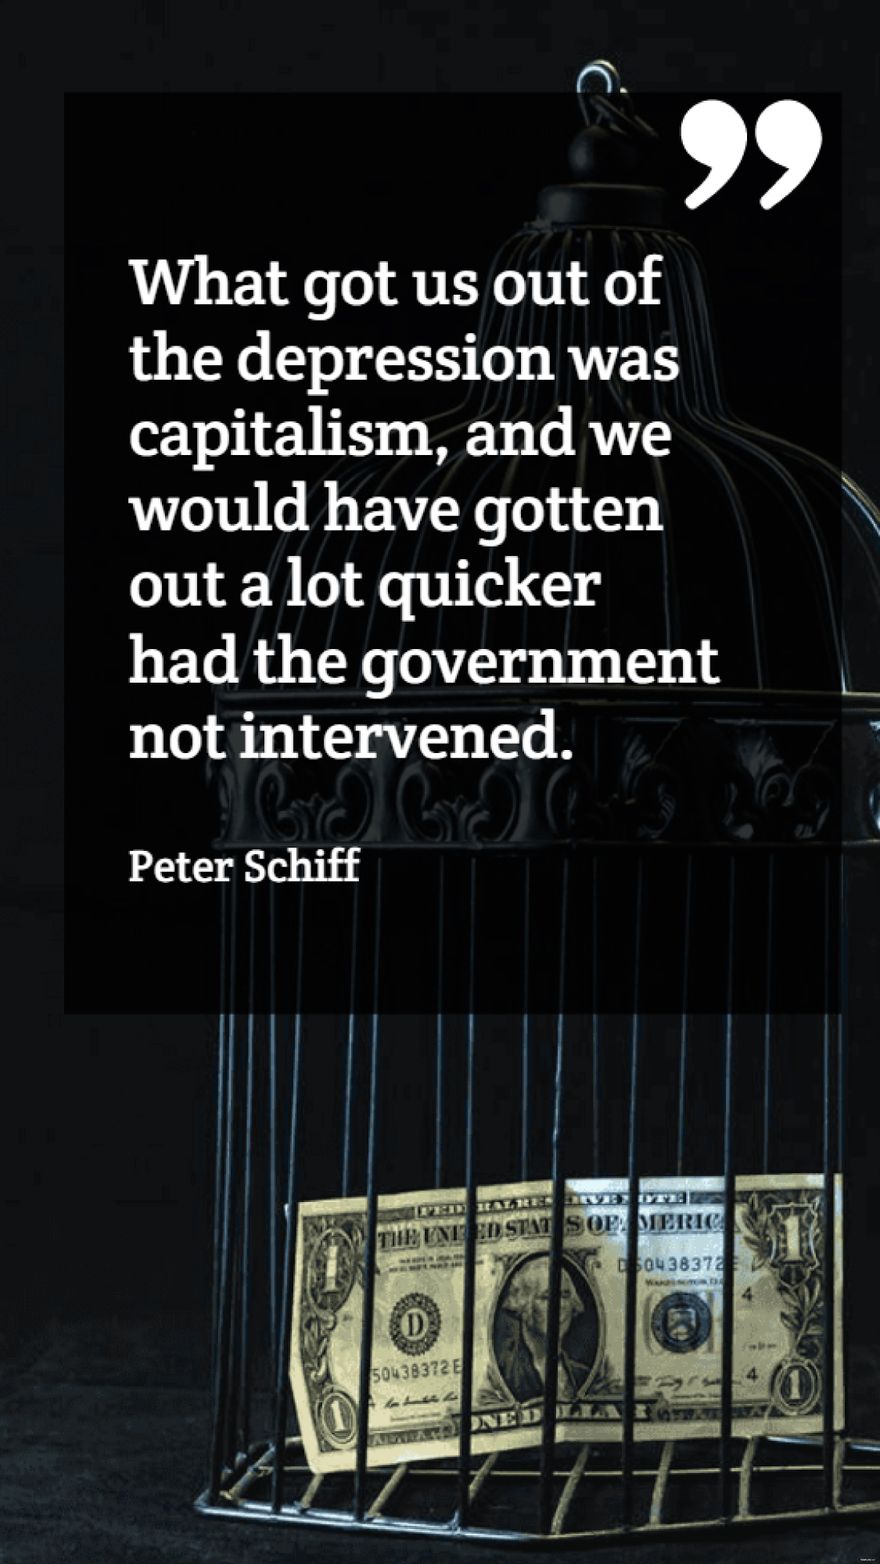 Peter Schiff - What got us out of the depression was capitalism, and we would have gotten out a lot quicker had the government not intervened.